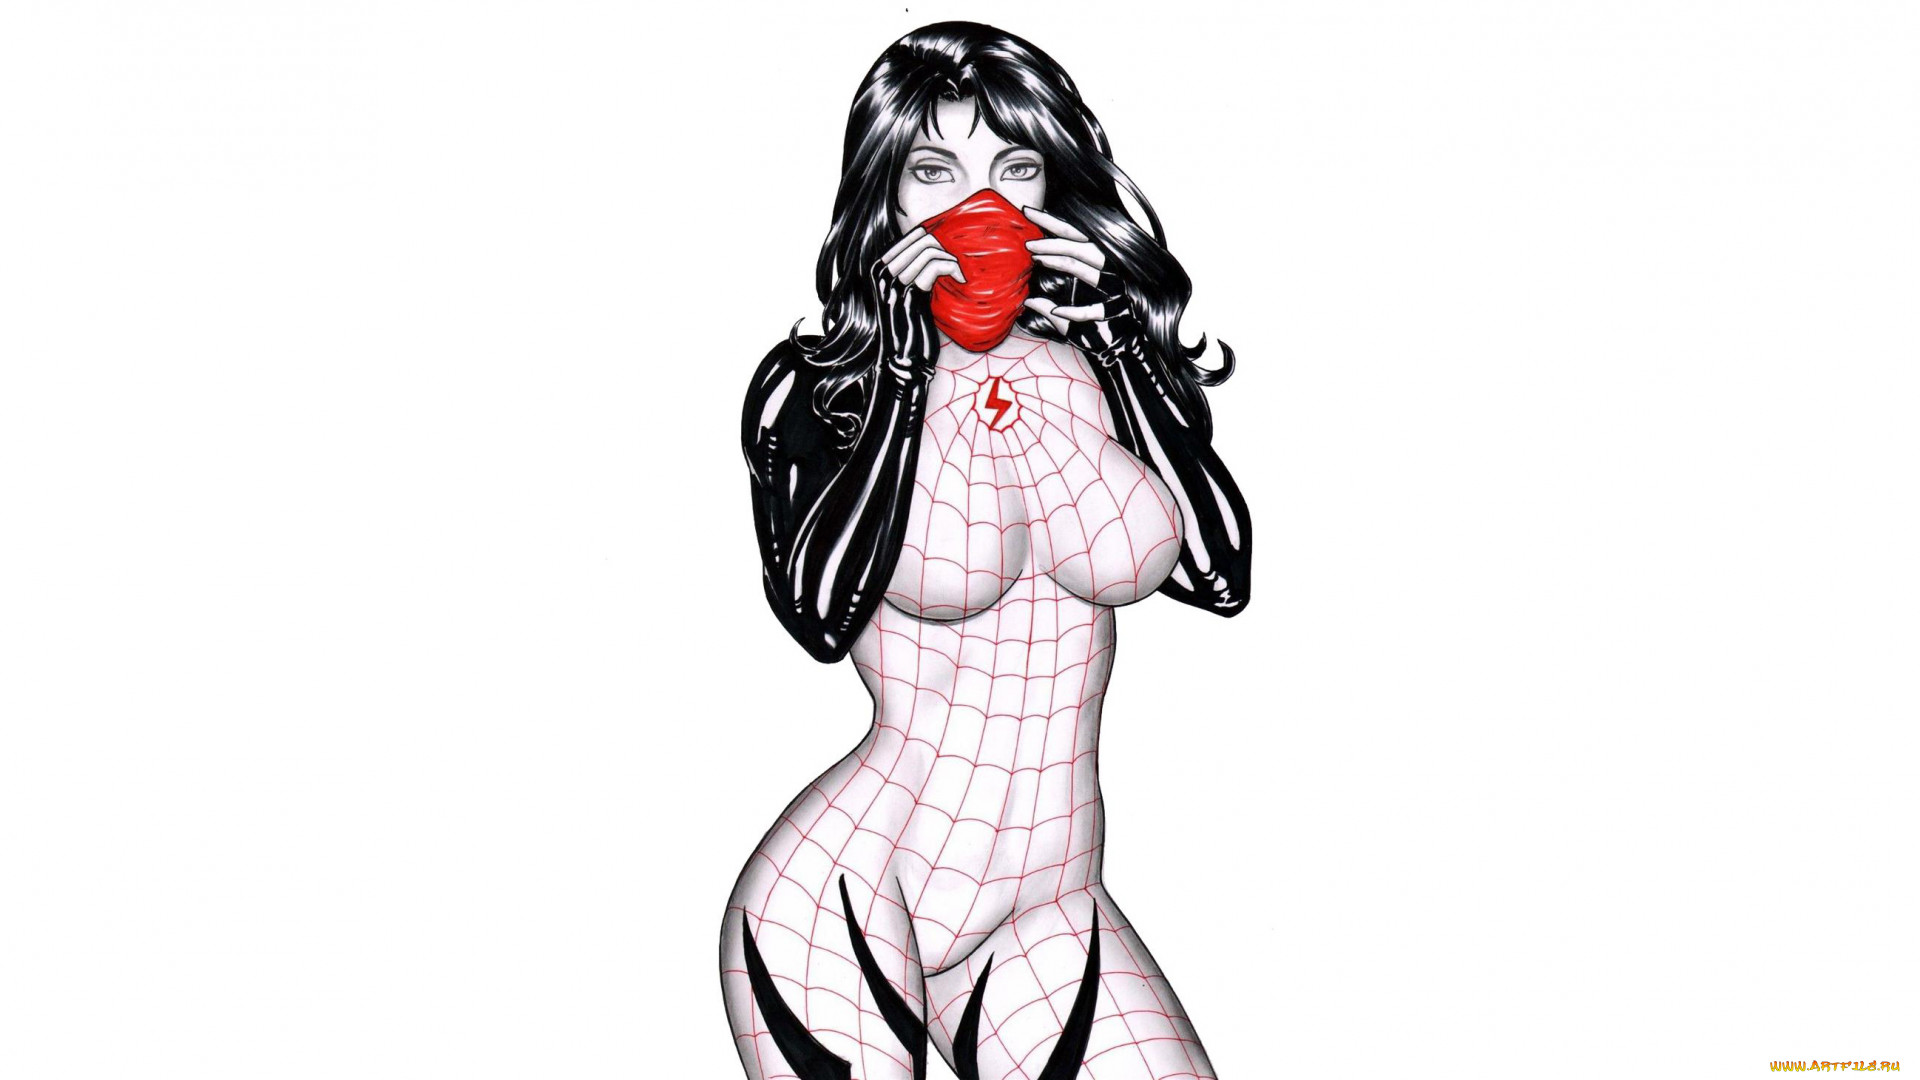 General 1920x1080 artwork women fantasy girl simple background white background boobs big boobs standing looking at viewer mask Silk (Marvel character) Spider-Man